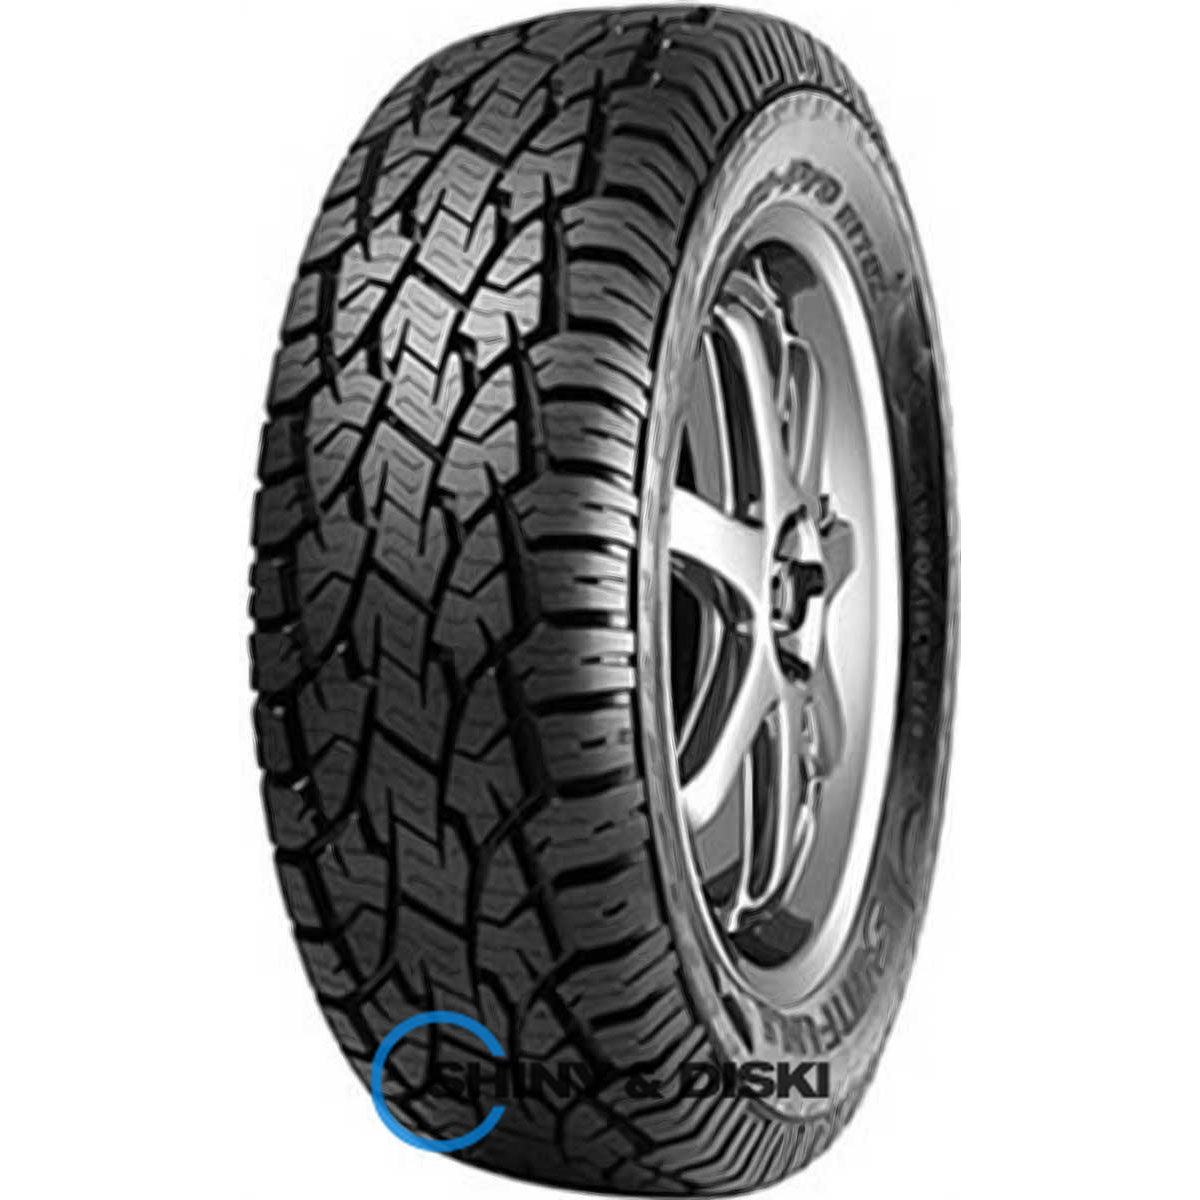 sunfull mont-pro at782 215/85 r16 115r